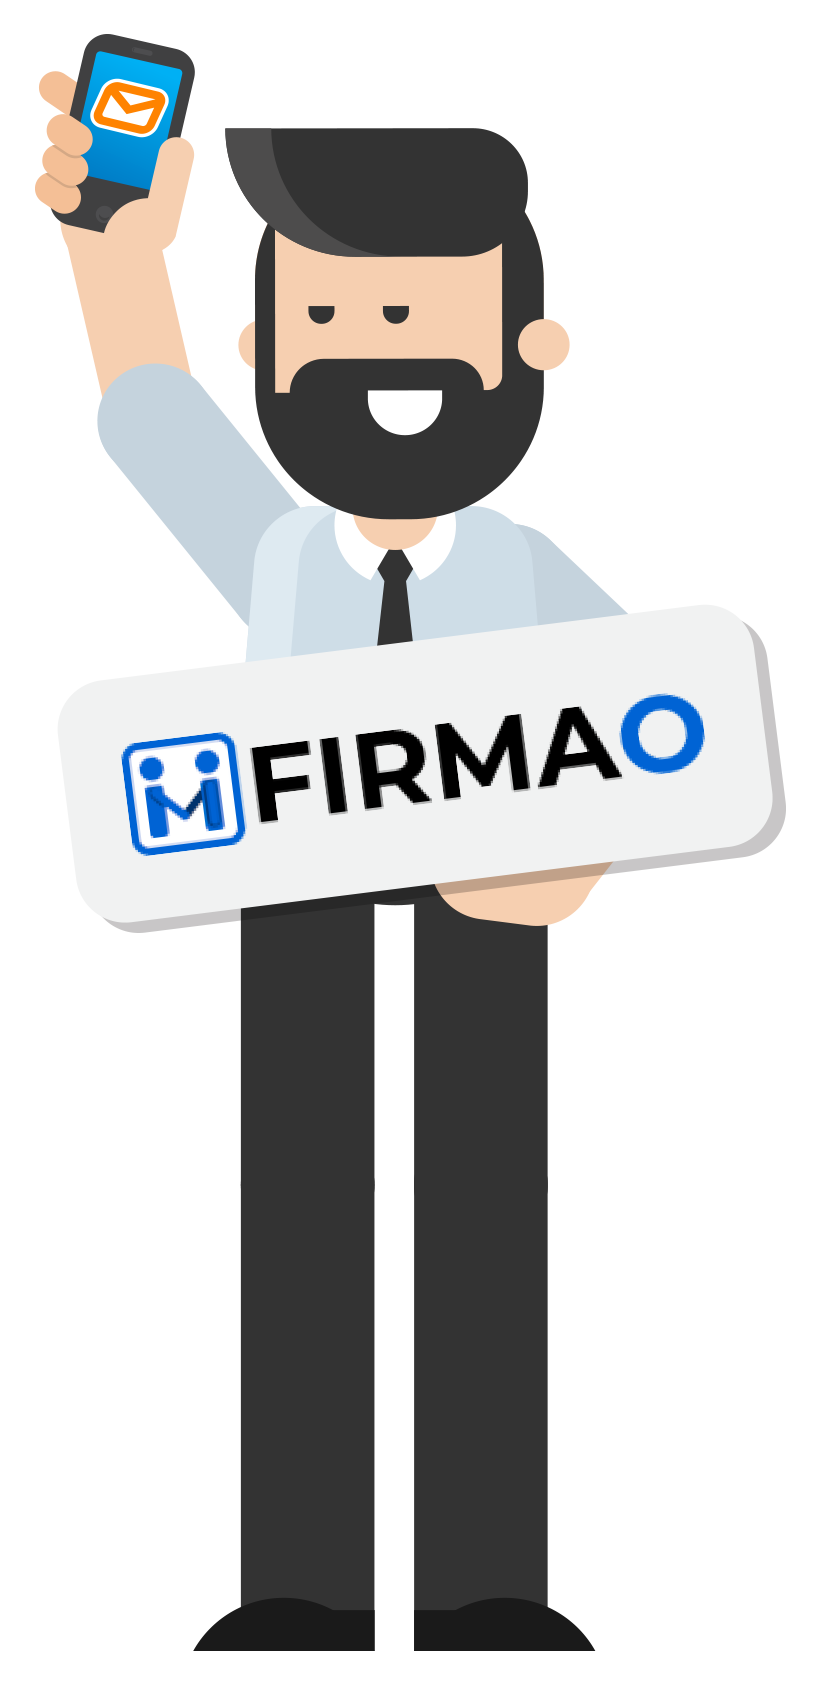 How you can benefit using BulkSMS with Firmao?